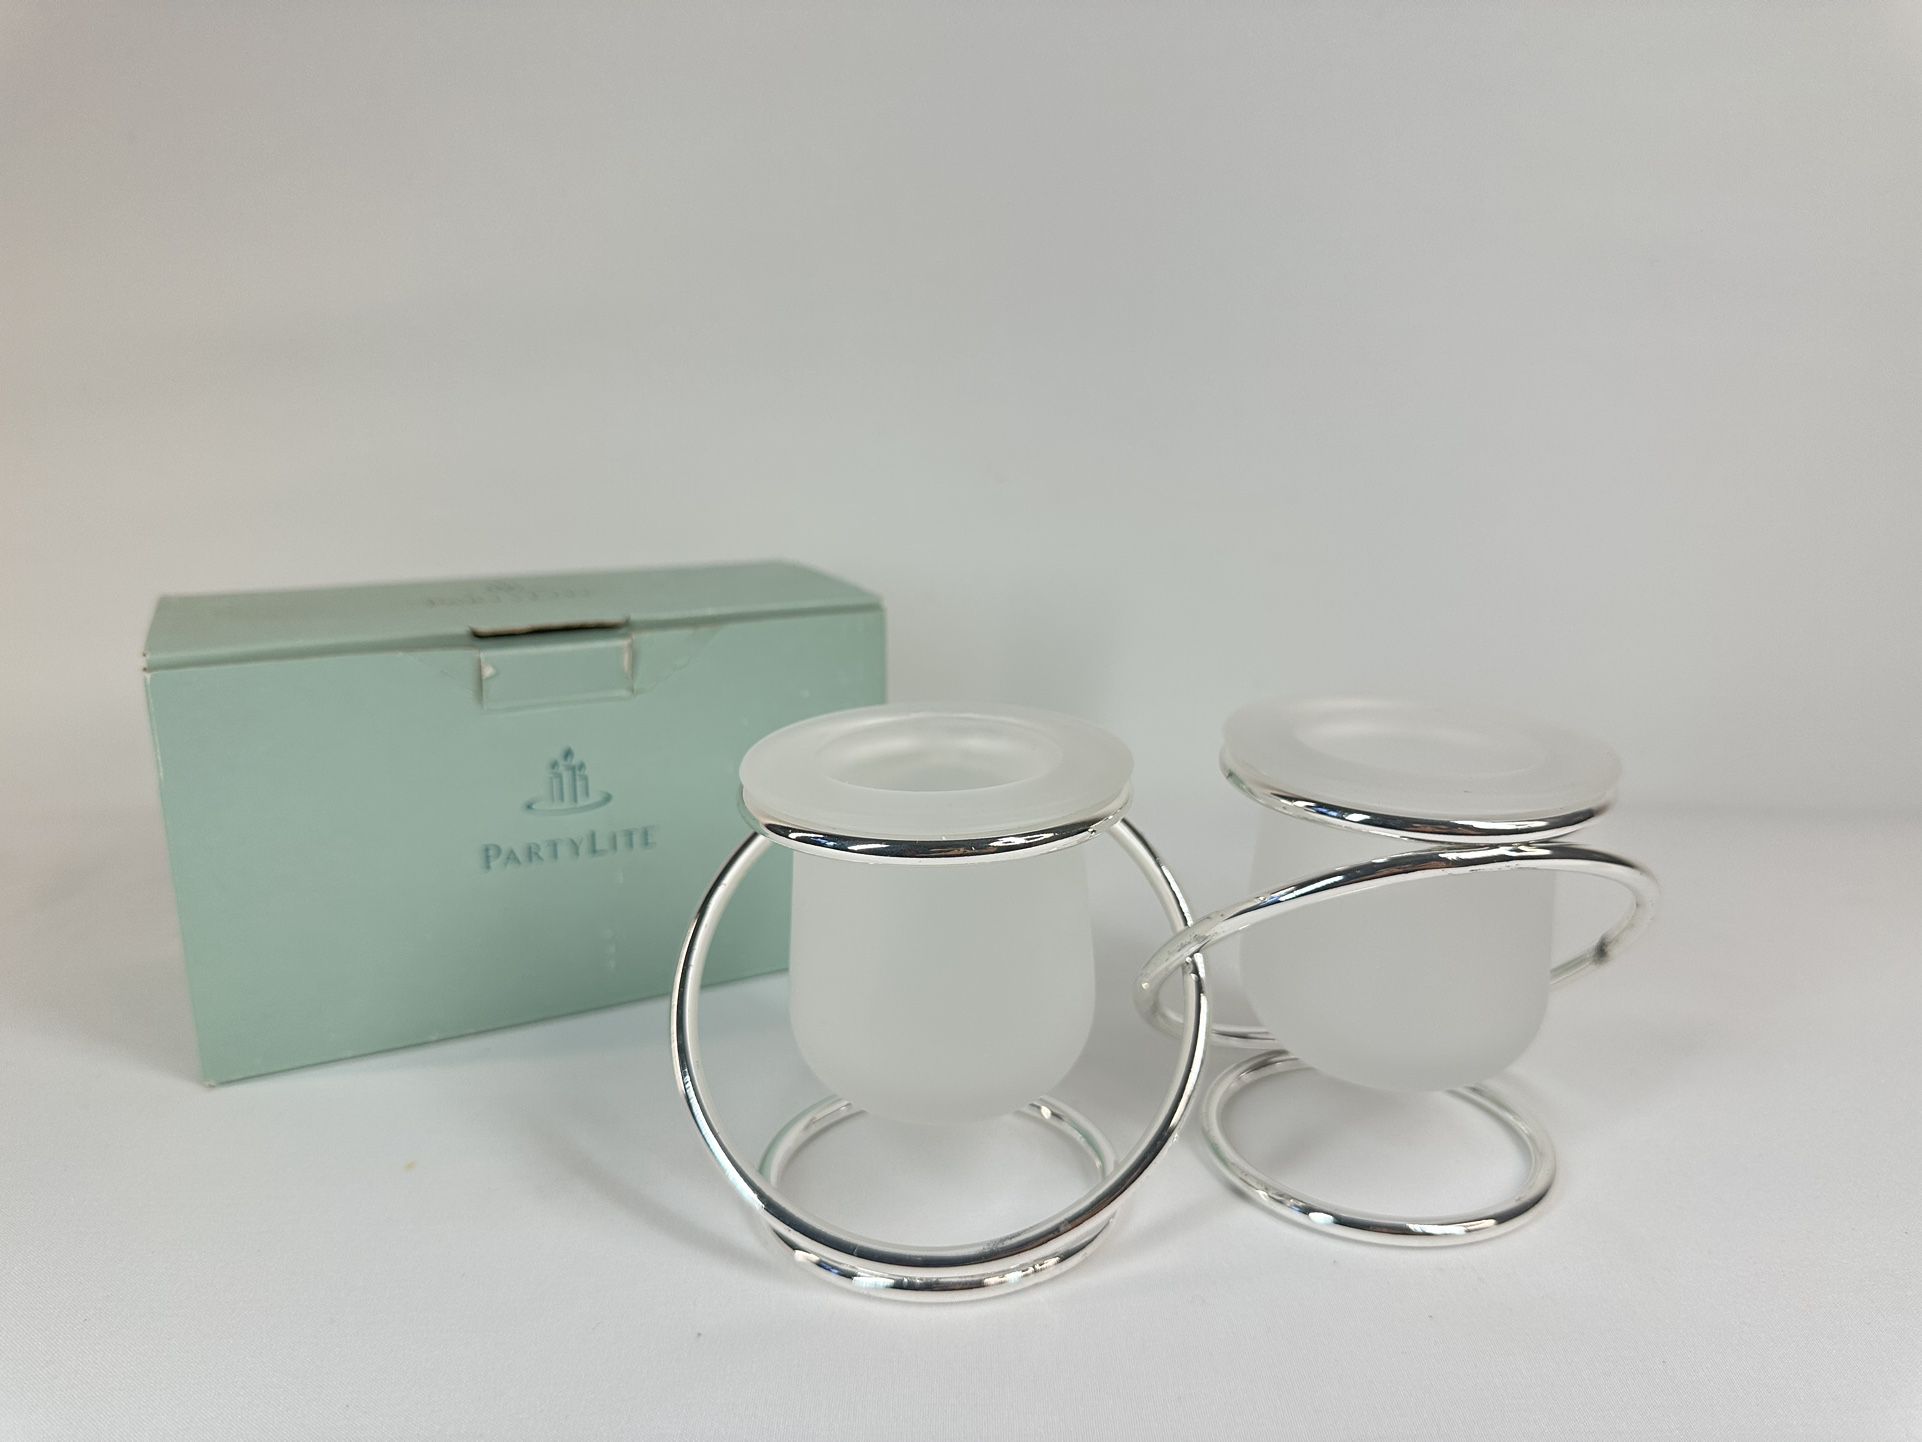 #1756 PartyLite Silver Plated Gemini Votive Candle Holders in Box P7207